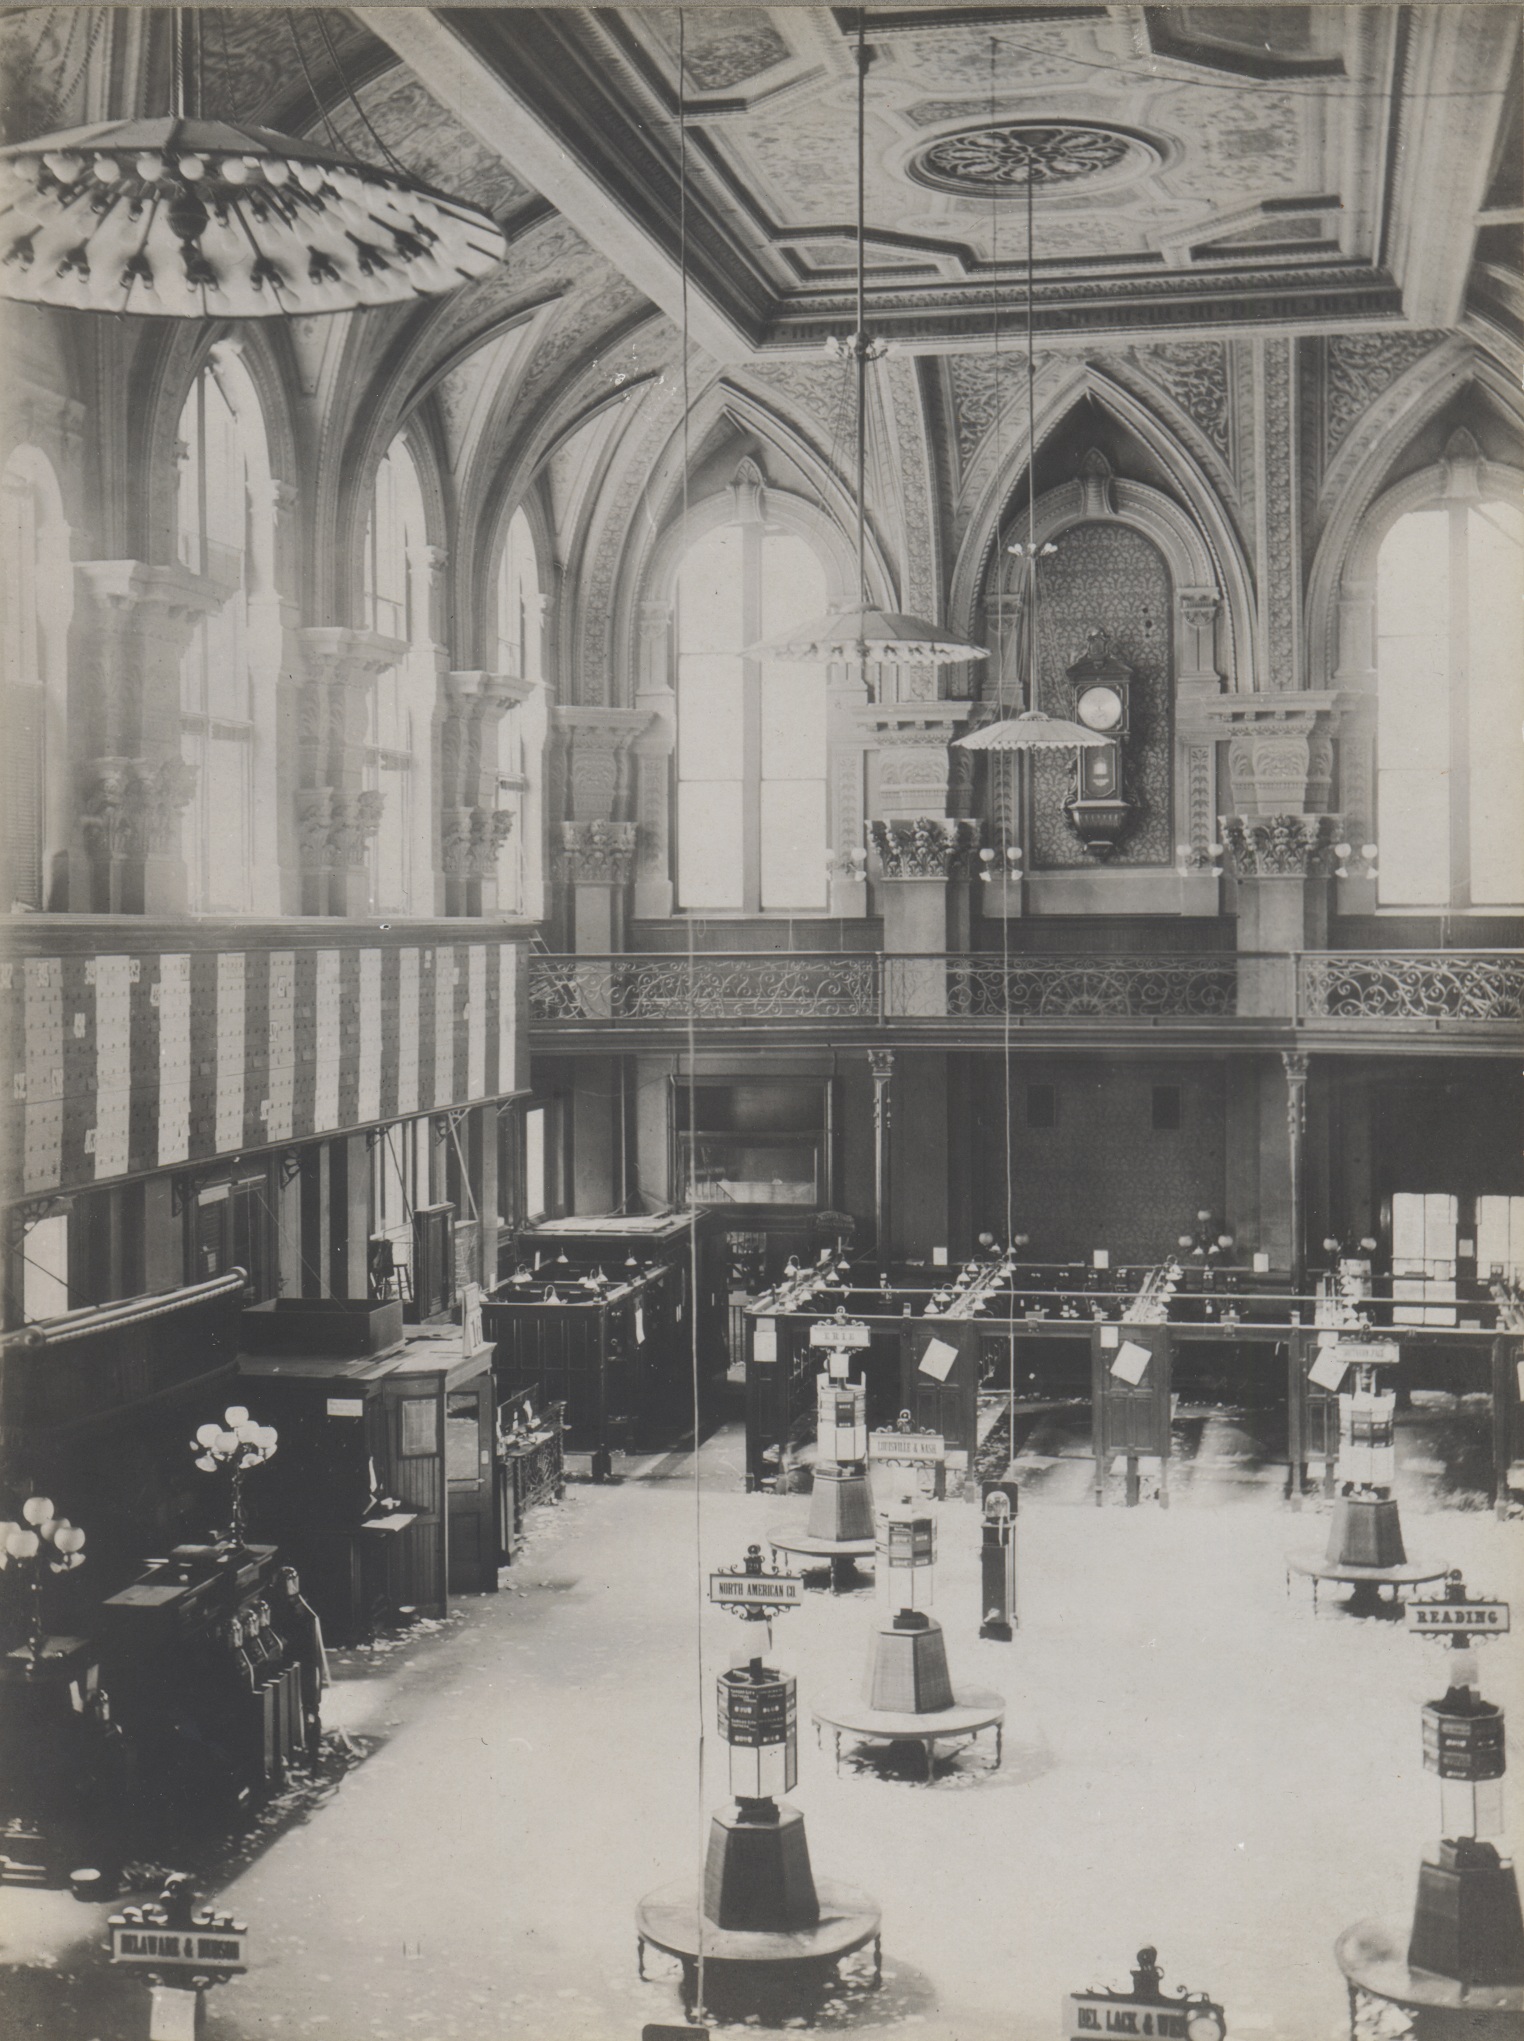 NYSE Trading Floor, 1881 with annuciator board pictured left.